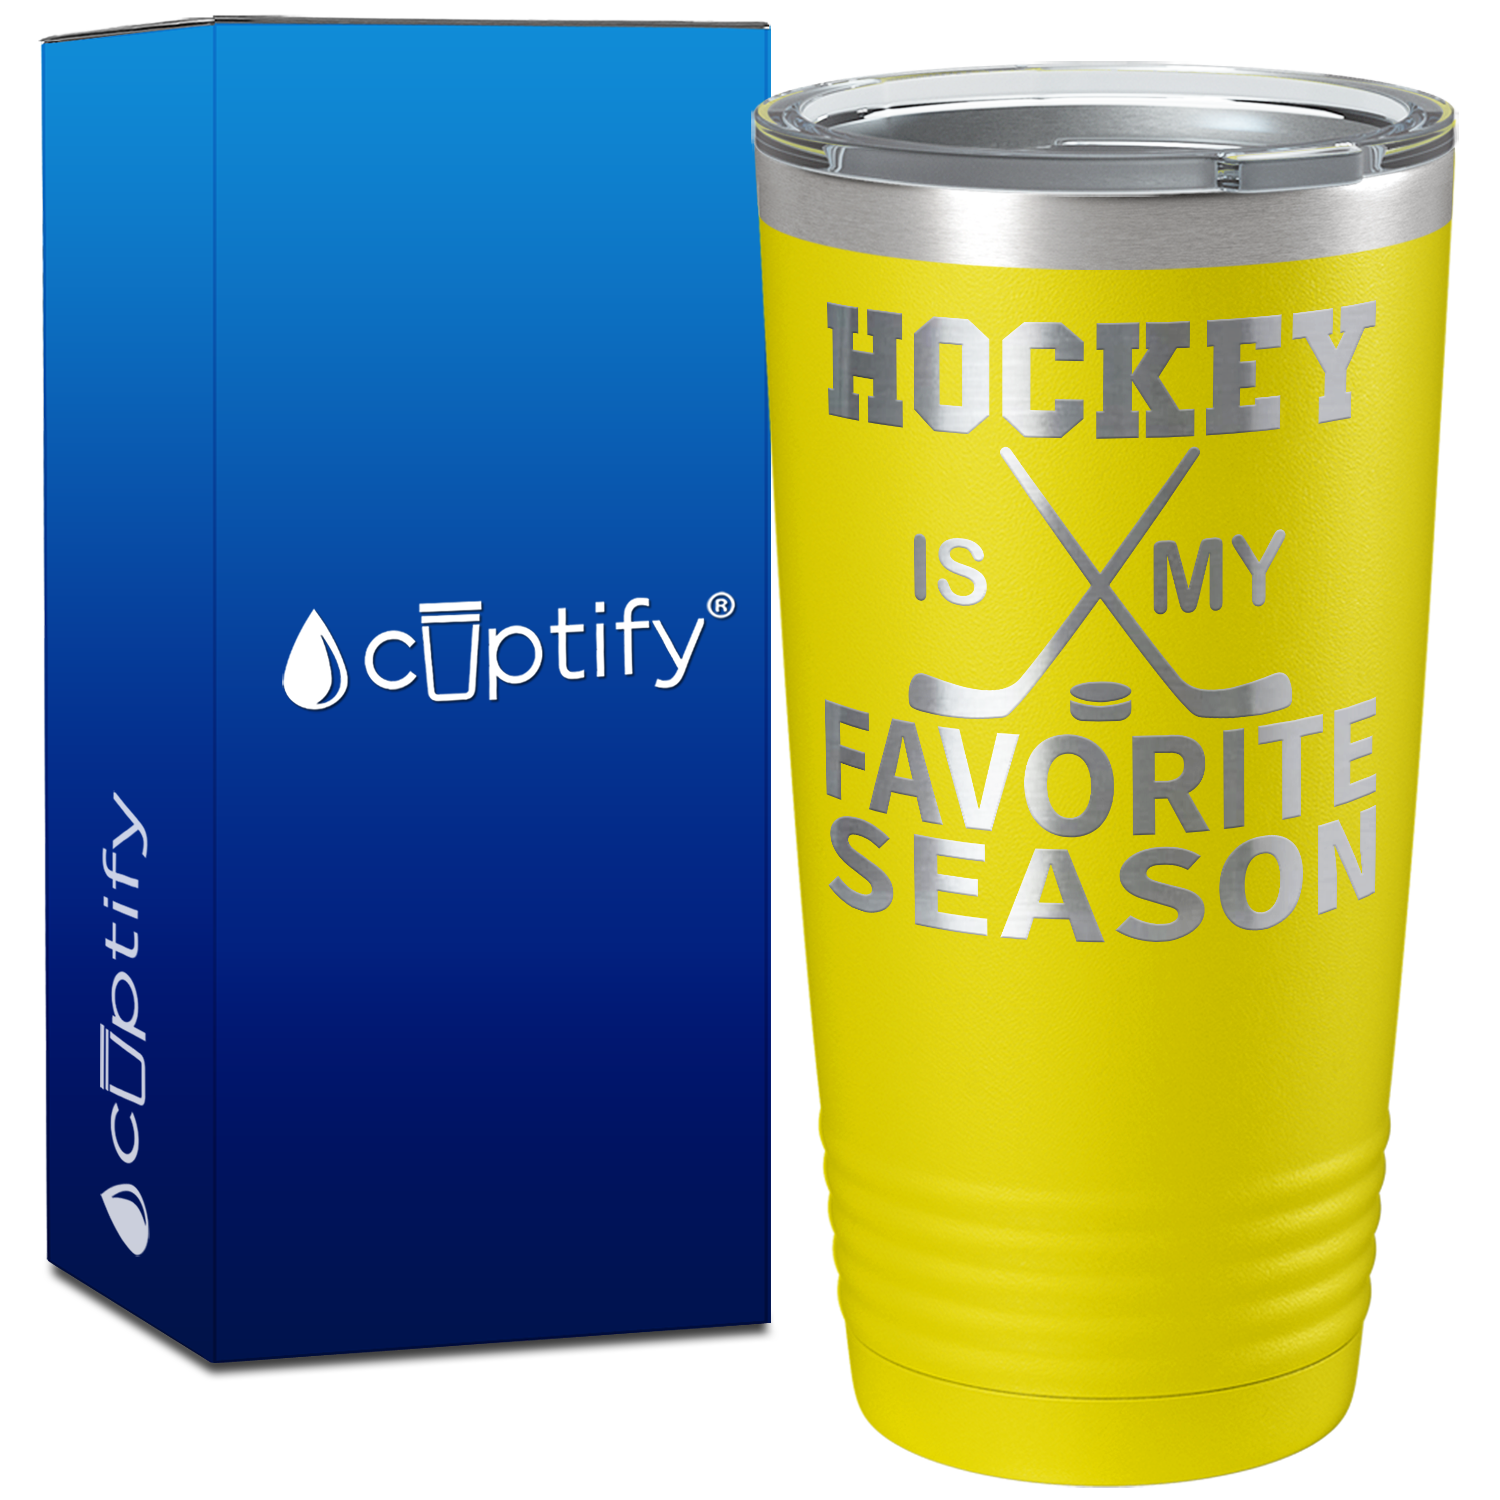 Hockey is My Favorite Person on 20oz Tumbler